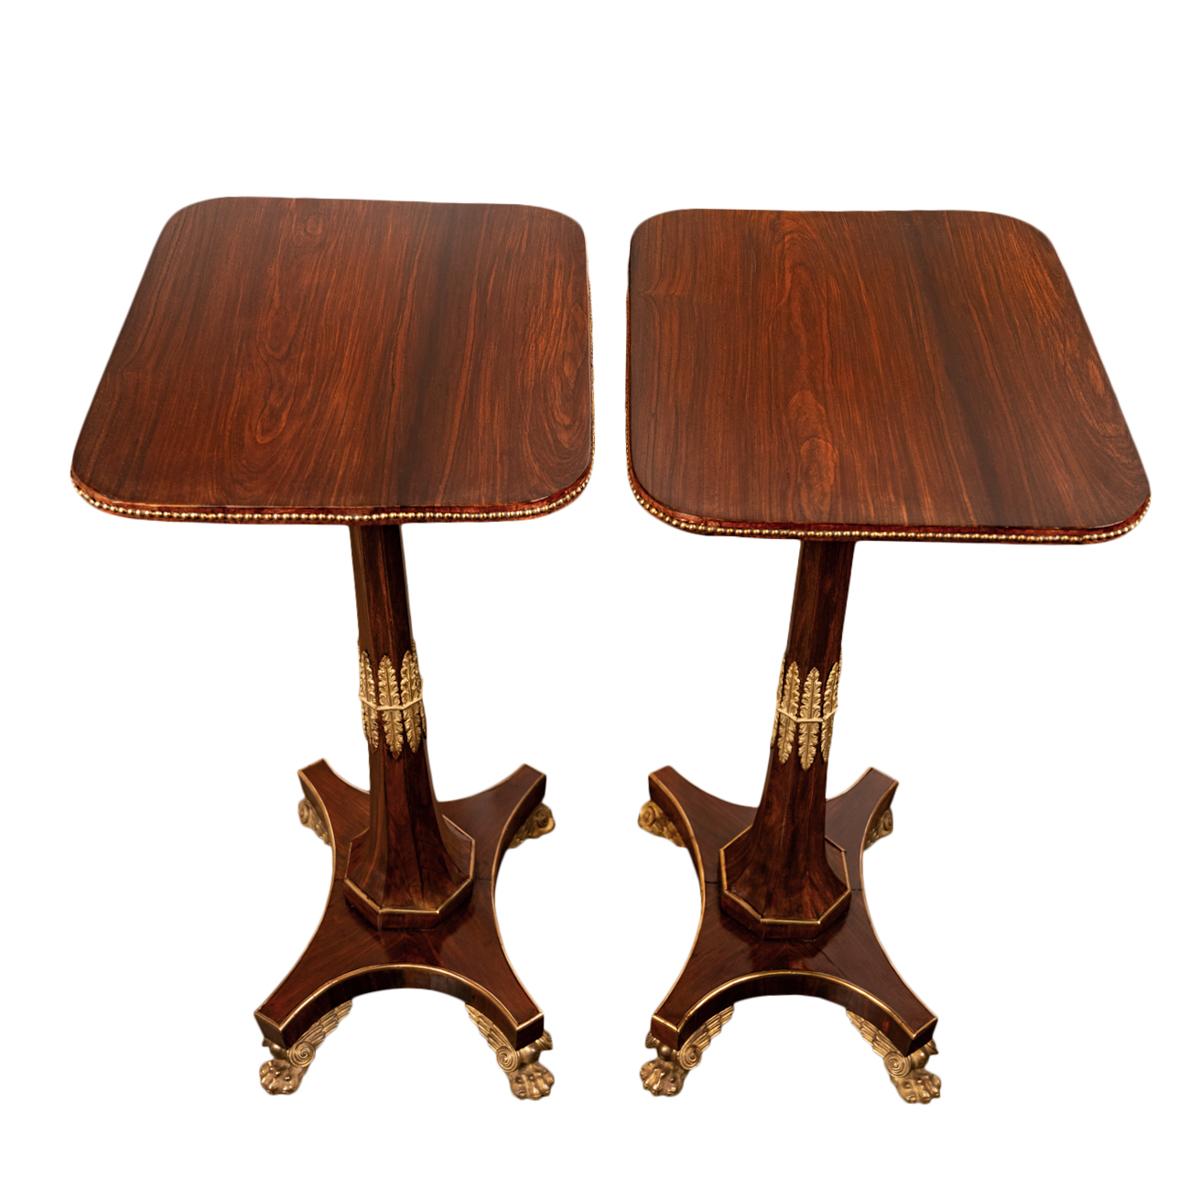 Early 19th Century Pair Antique French Empire Napoleonic Neoclassical Rosewood Ormolu Side Tables For Sale